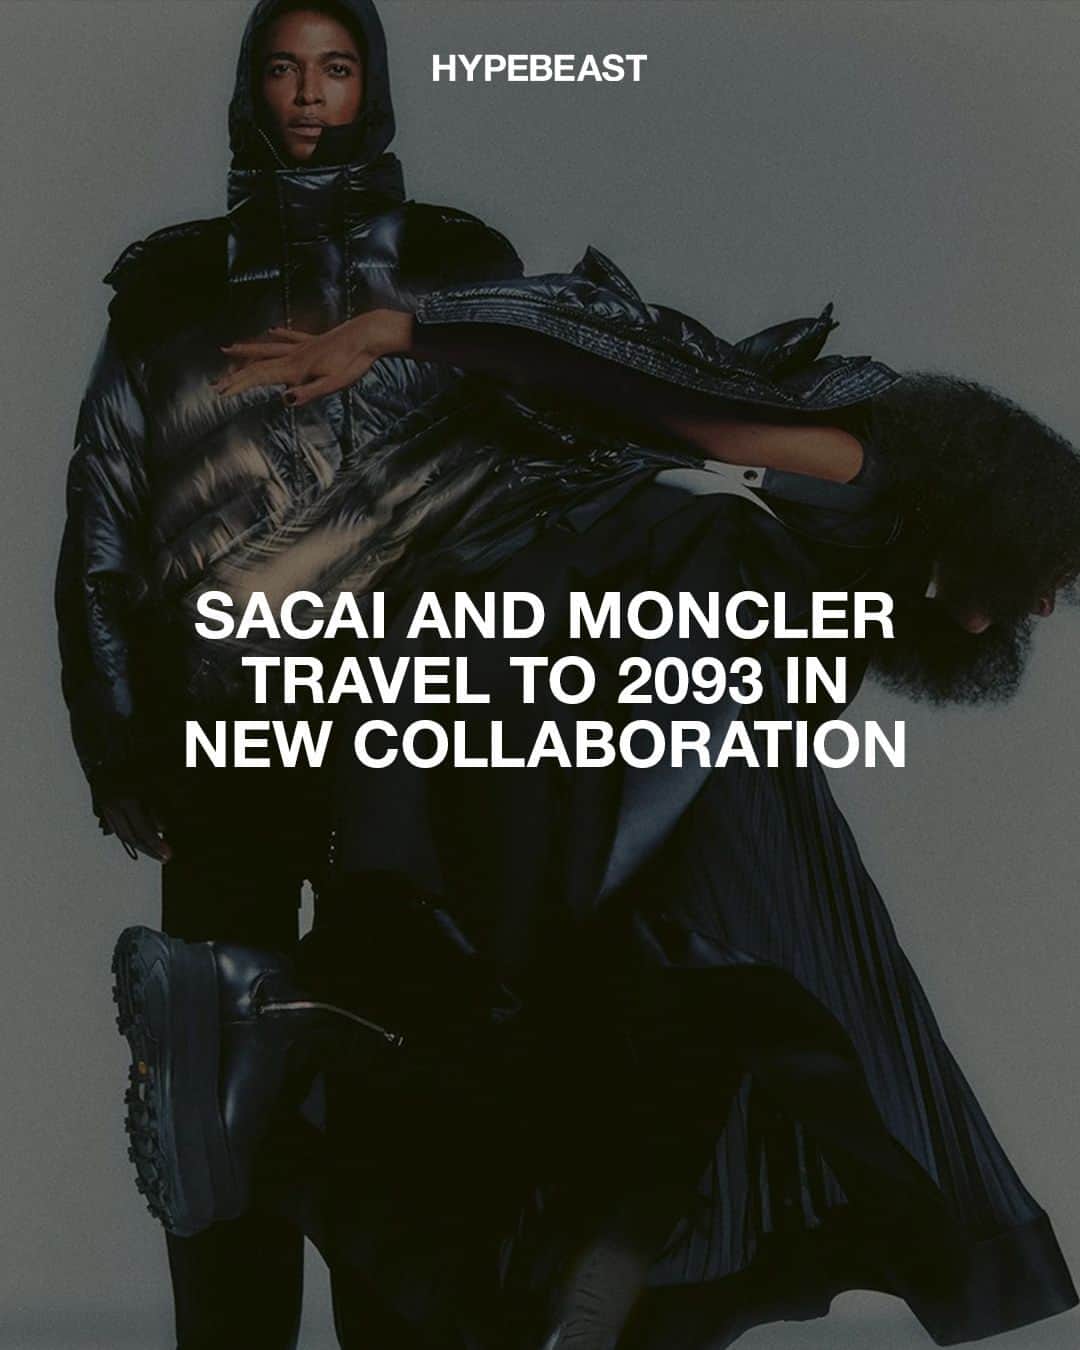 HYPEBEASTのインスタグラム：「@moncler and @sacaiofficial have reunited for a new collection, marking the first one in about a decade between the two brands.⁠ ⁠ The pieces are a continued celebration of Moncler’s 70th anniversary in 2022 and are designed with the idea of bridging the past seven decades of Moncler's history with the next 70 years. ⁠ ⁠ For the latest offering, items incorporate sacai’s hybrid aesthetic with Moncler’s outdoor mountaineering spirit as Chitose Abe reimagines key pieces by combining both brand’s signature tailoring with new shapes. Each look is a multi-piece design that can be removed or reconnected in different ways of styling. Internal straps can turn the jacket into a backpack, while jackets and blazers may feature pleated textures. Swipe for a closer look.⁠ Photo: Moncler/Sacai」